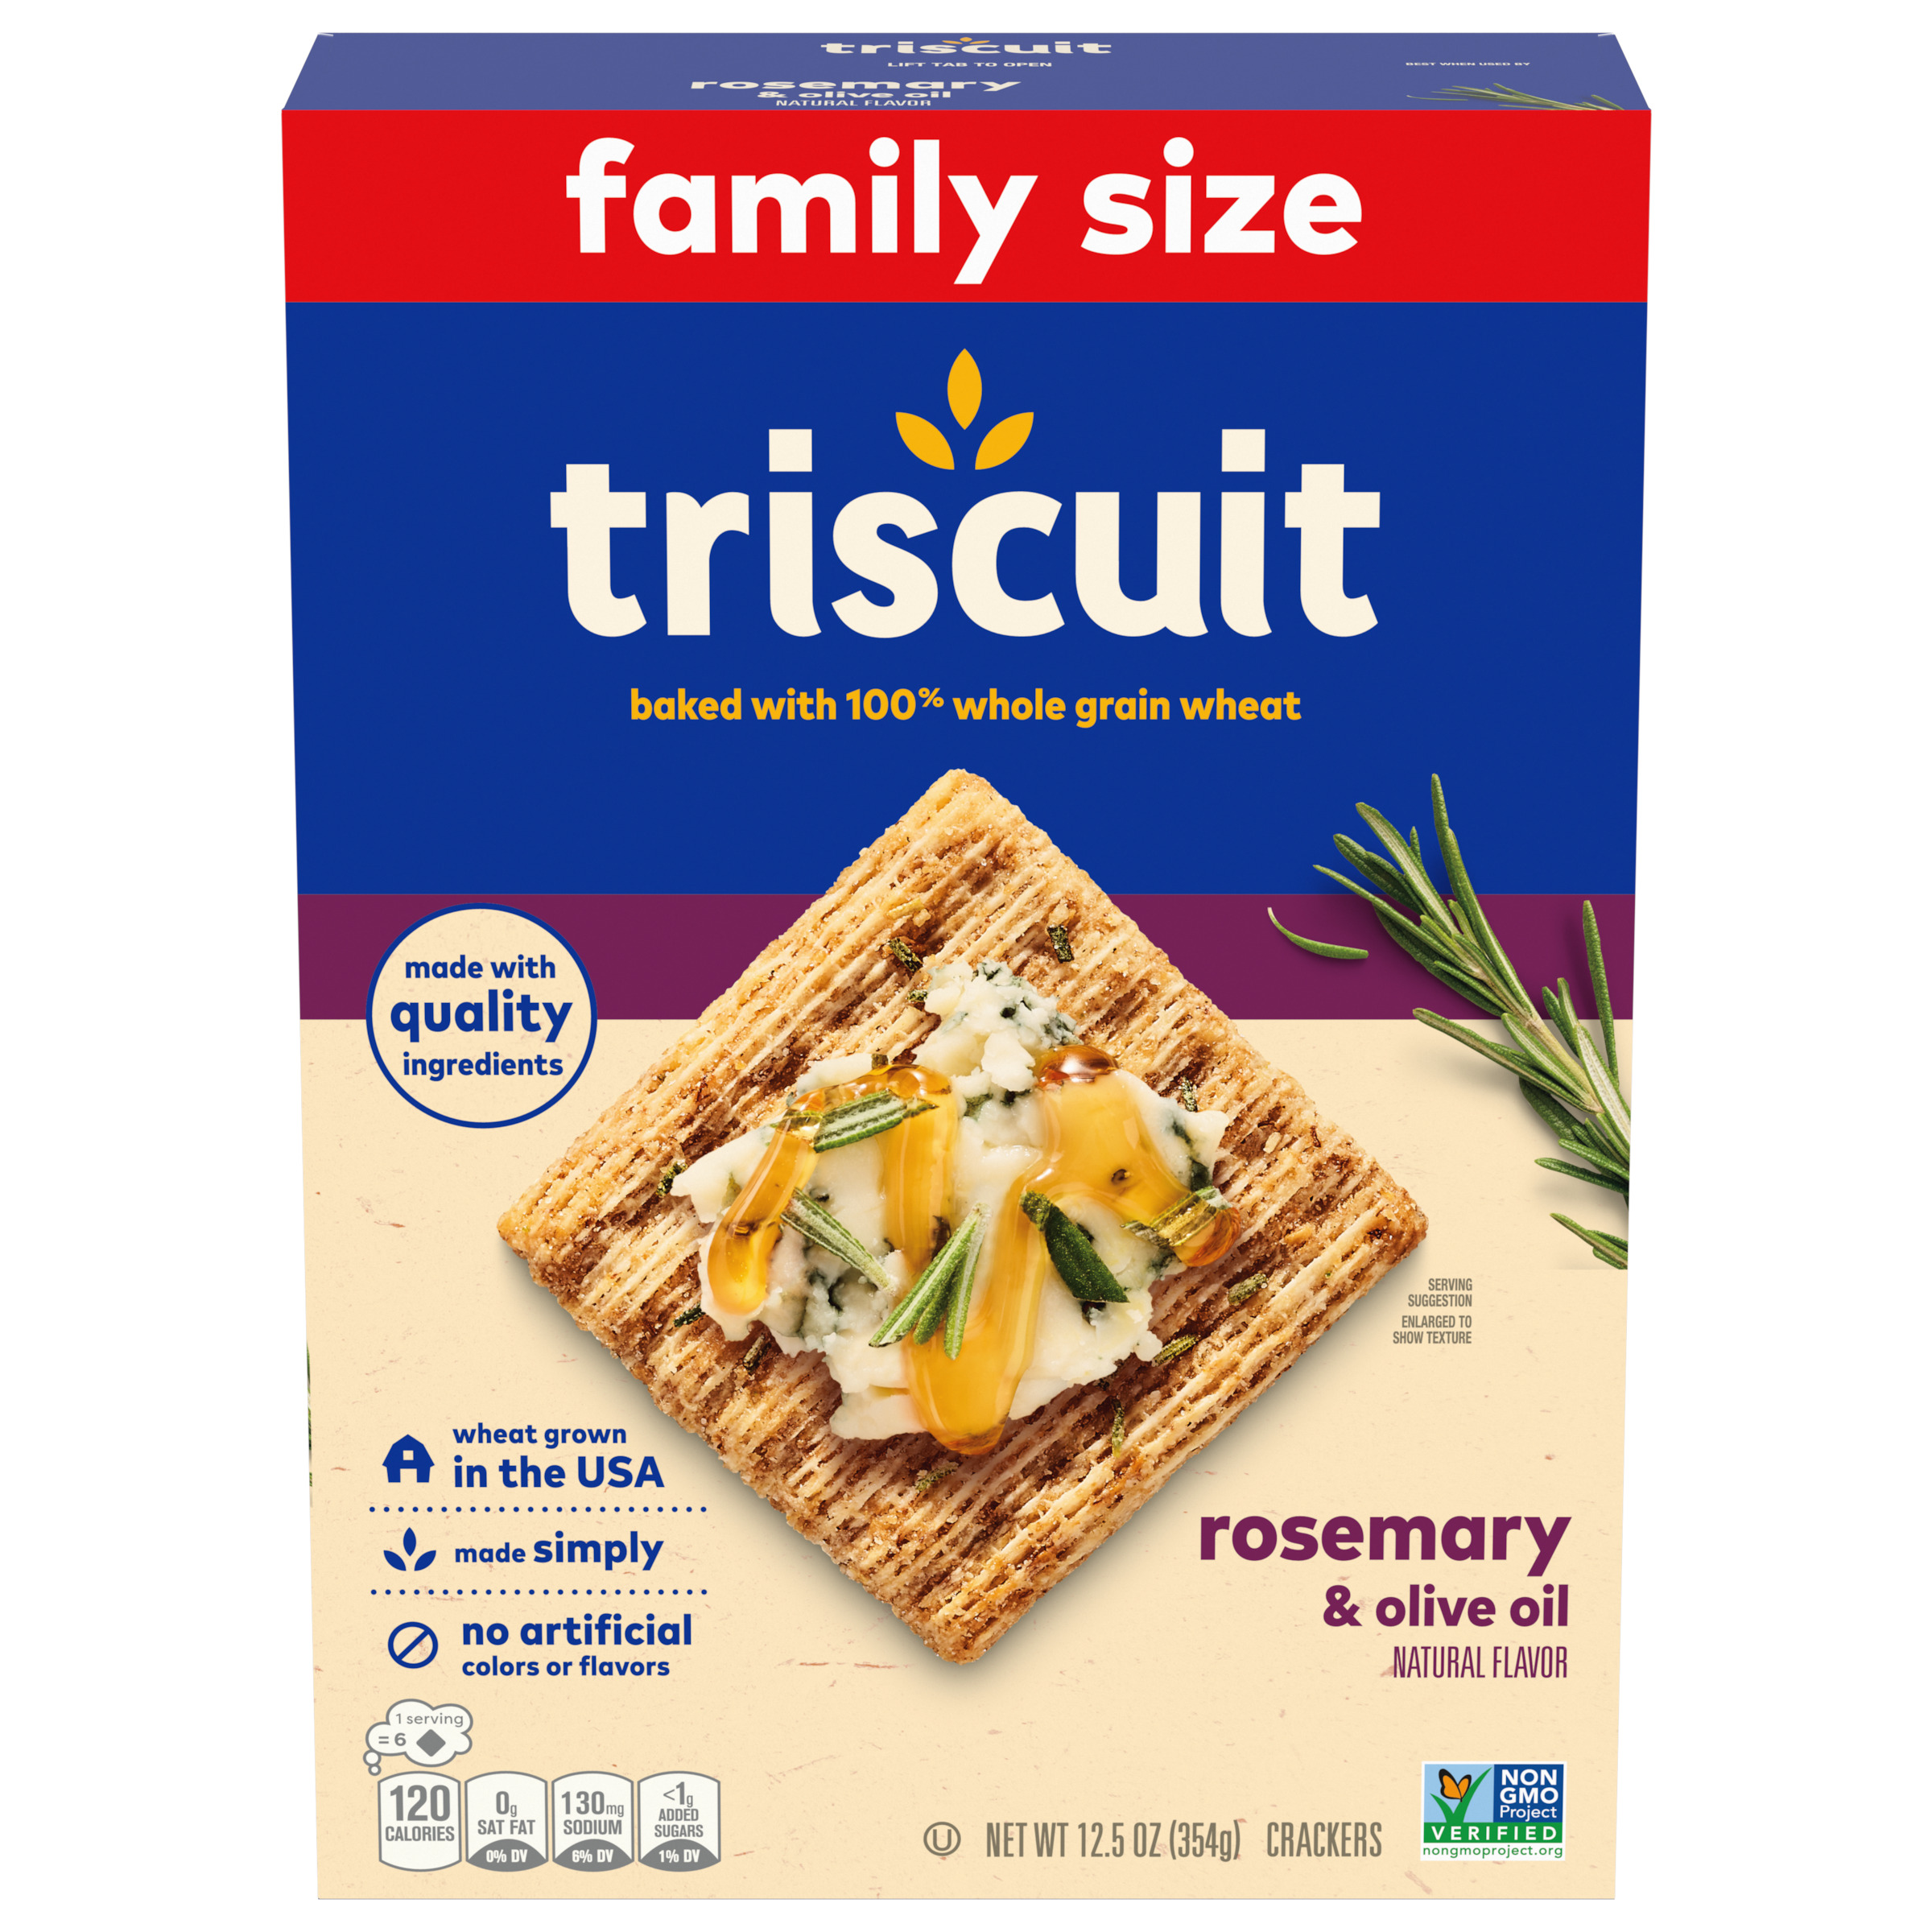 Triscuit Rosemary & Olive Oil Whole Grain Wheat Crackers, Family Size, 12.5 oz-1